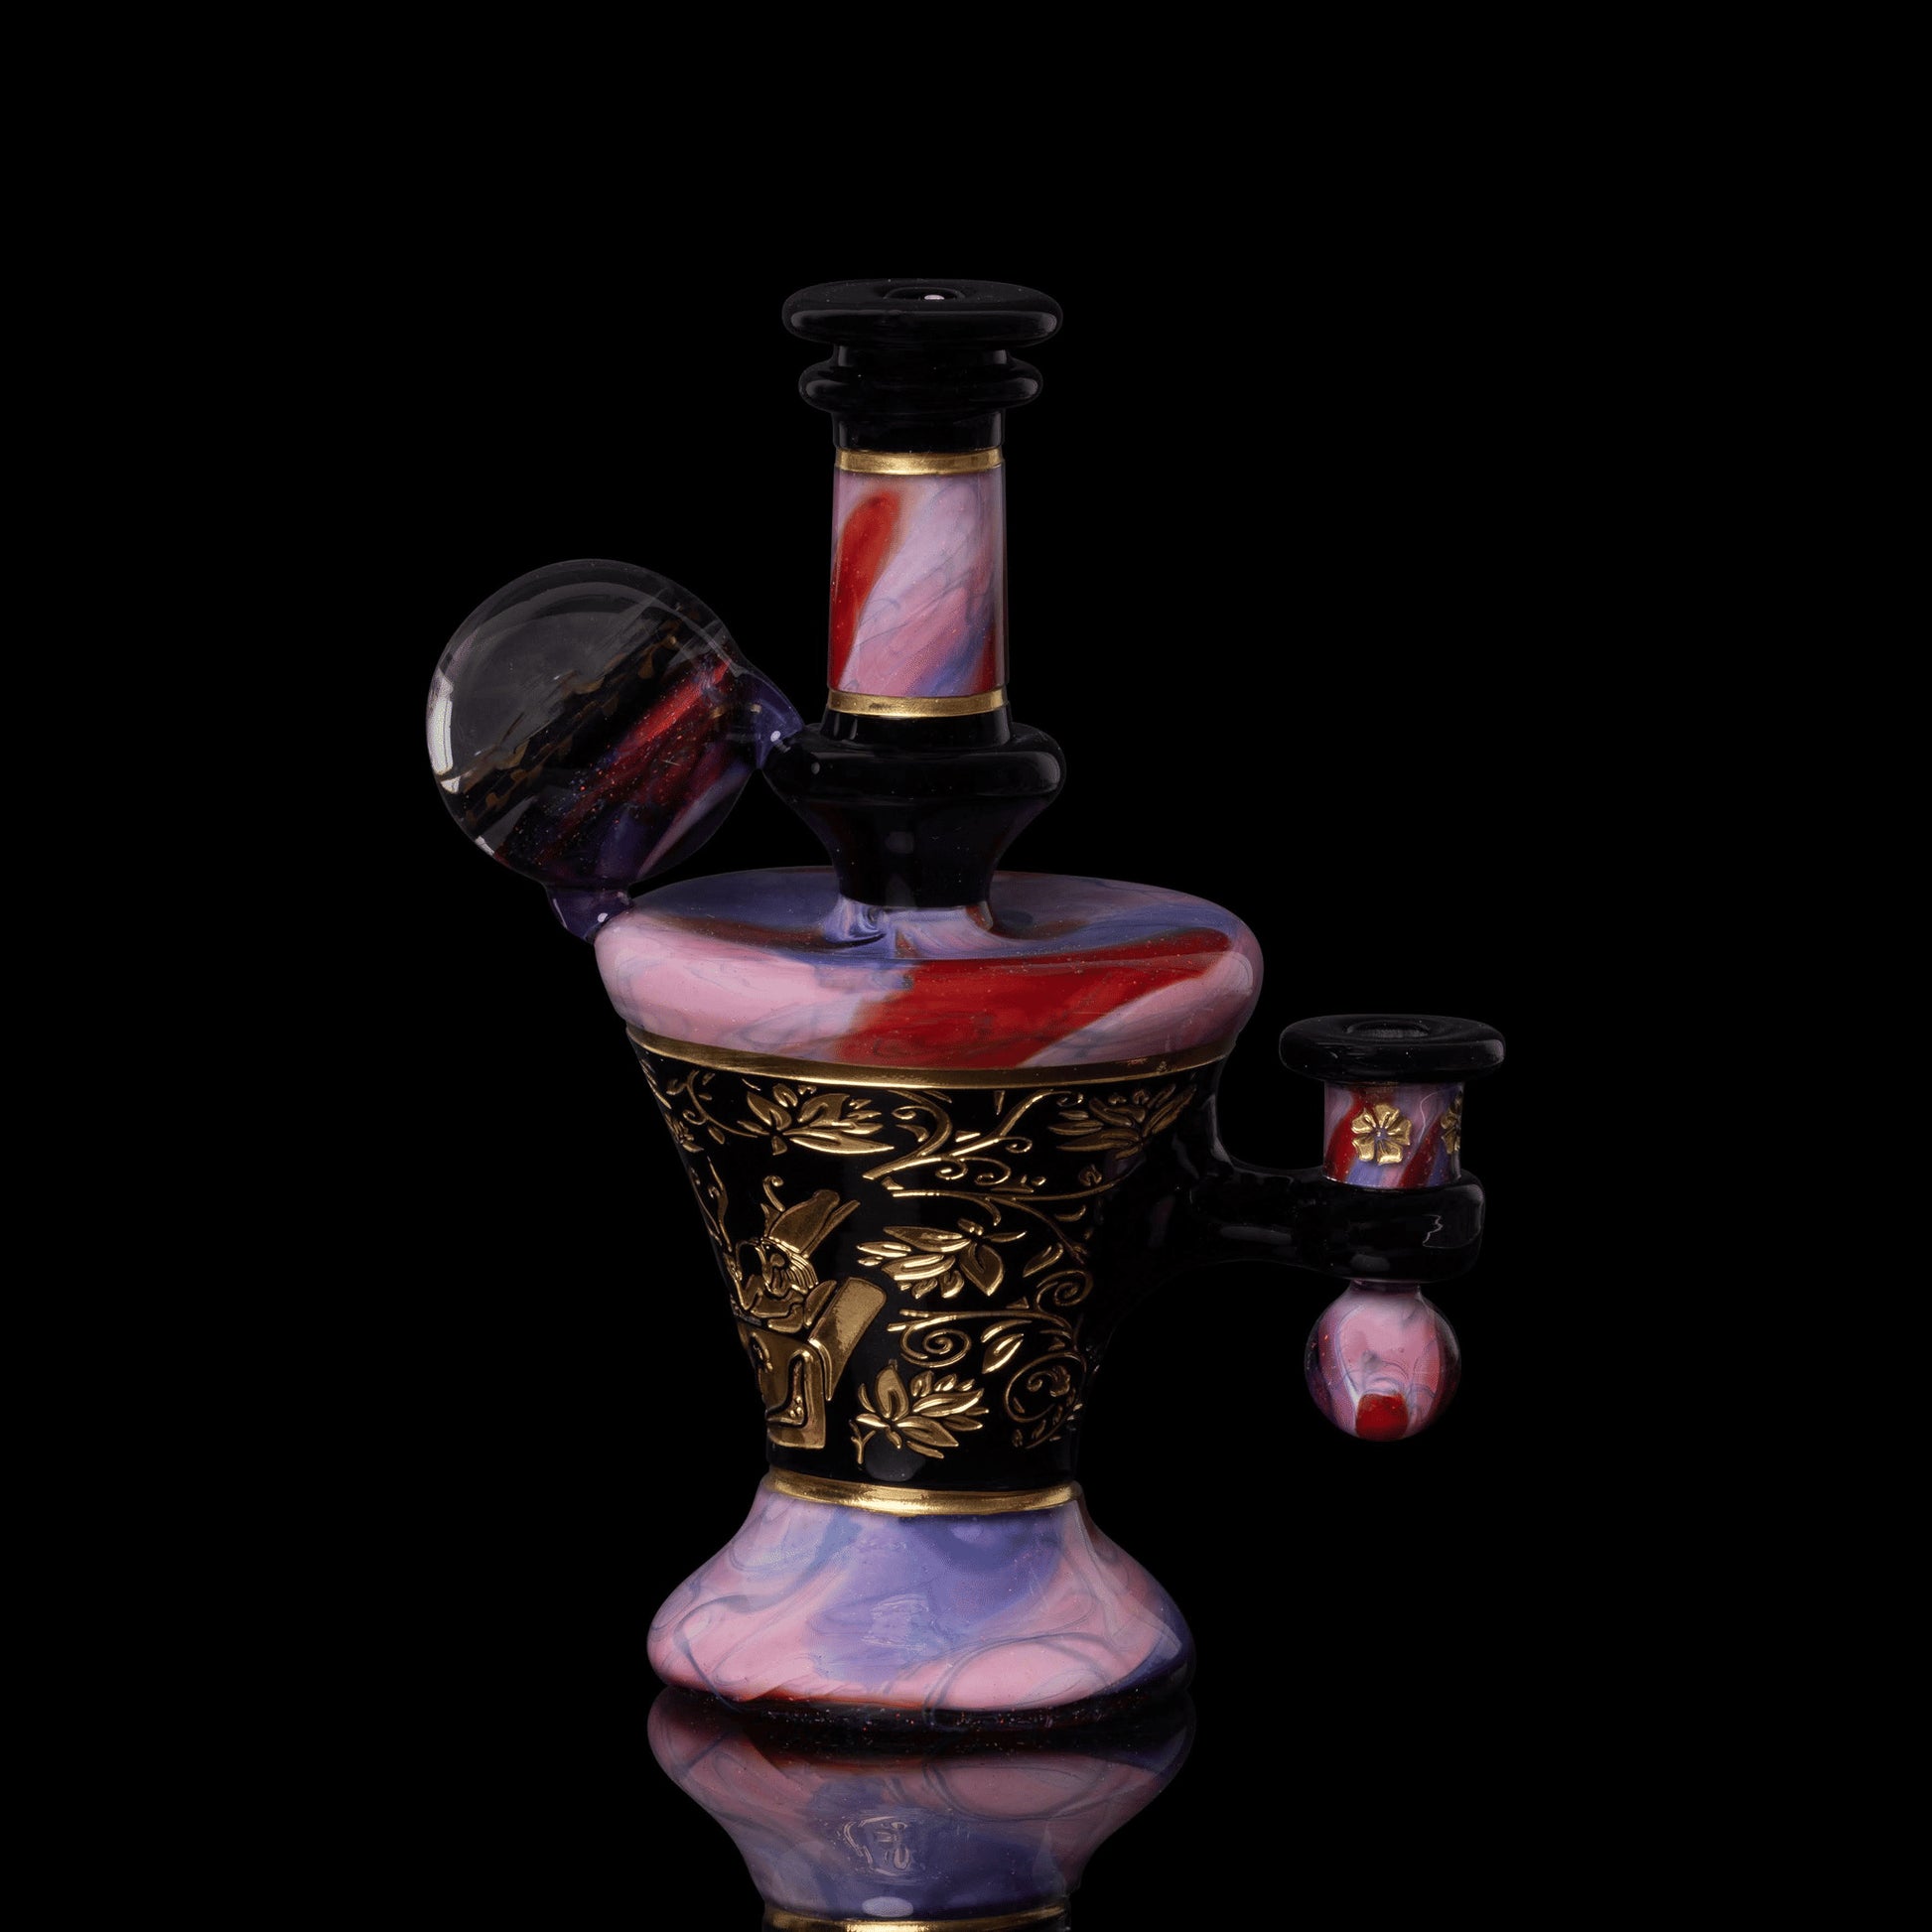 sophisticated design of the Collab When Gods Rest Rig by Green T Glass x Scomo Moanet (Scribble Season 2022)